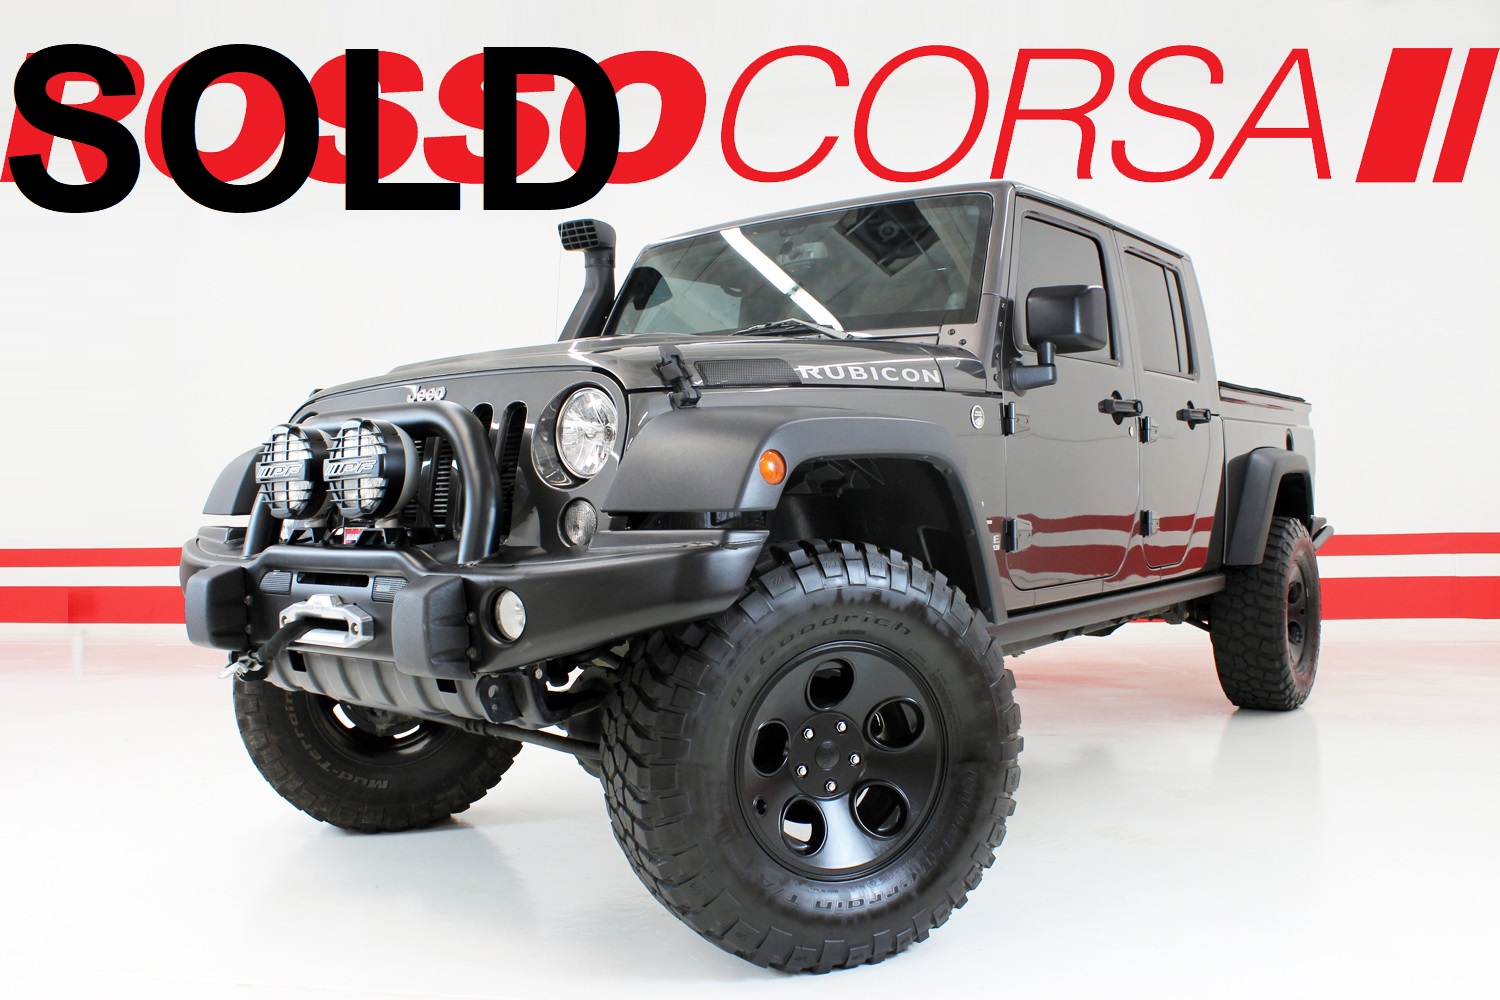 2014 Jeep Wrangler Unlimited Rubicon AEV Brute Double Cab ($150K MSRP)